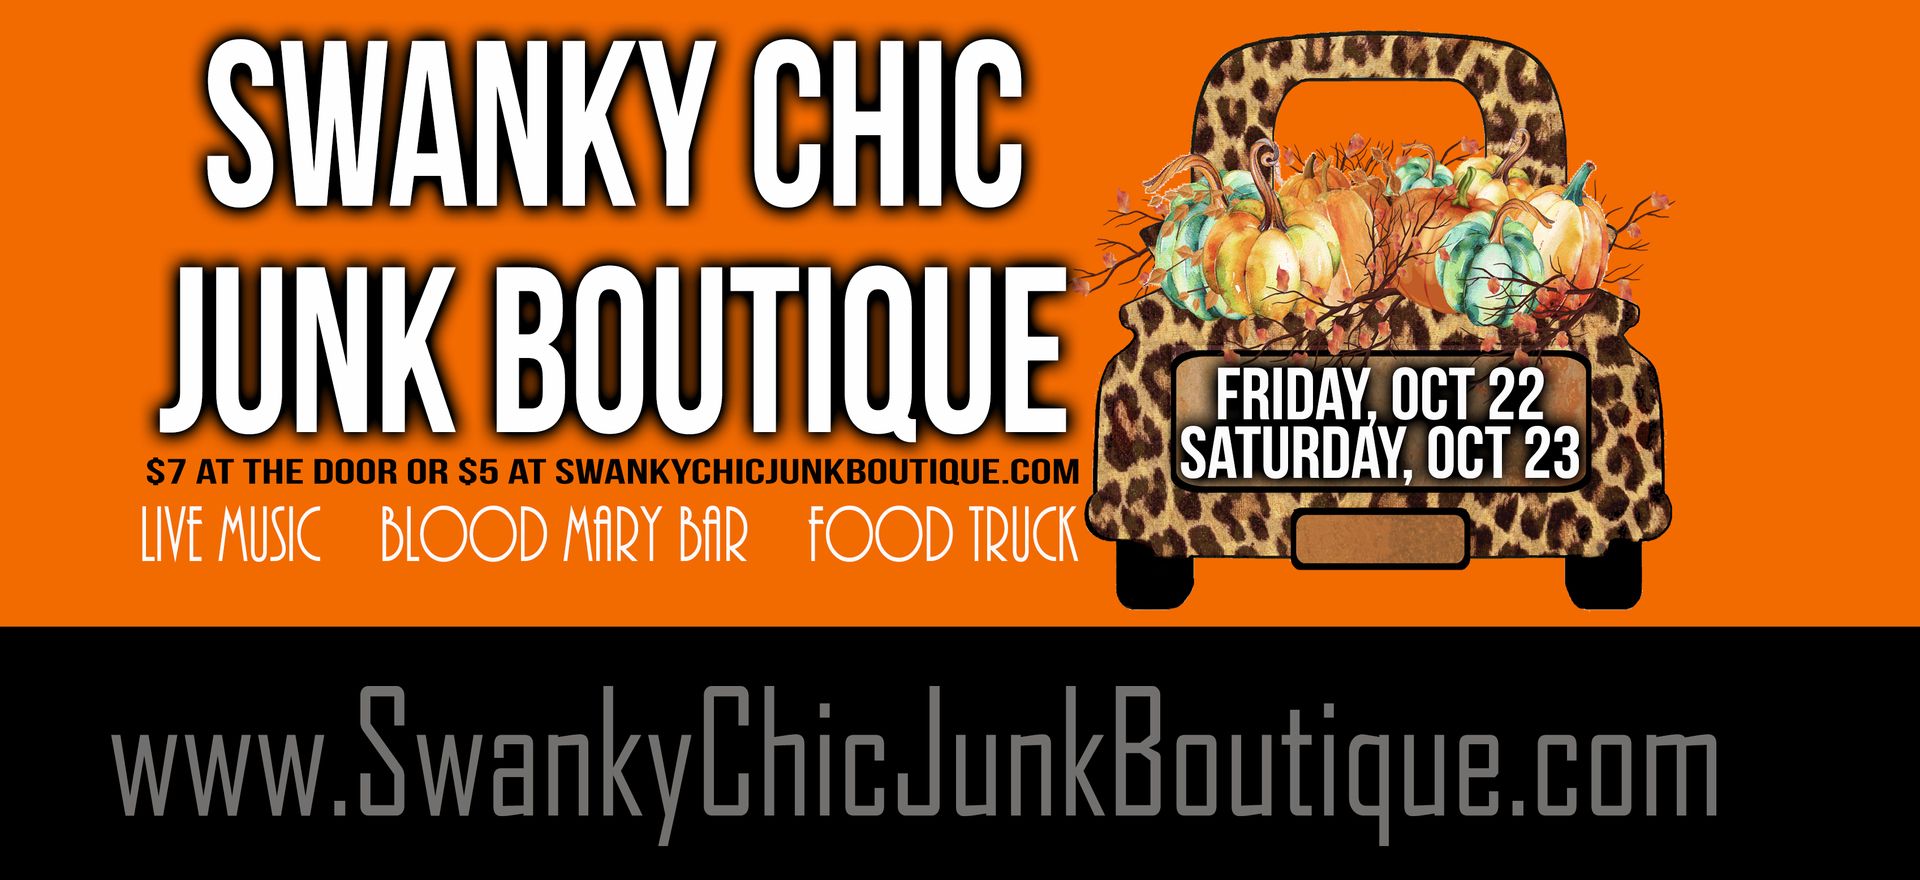 Swanky Chic Junk Boutique, South Sioux City, Nebraska, United States